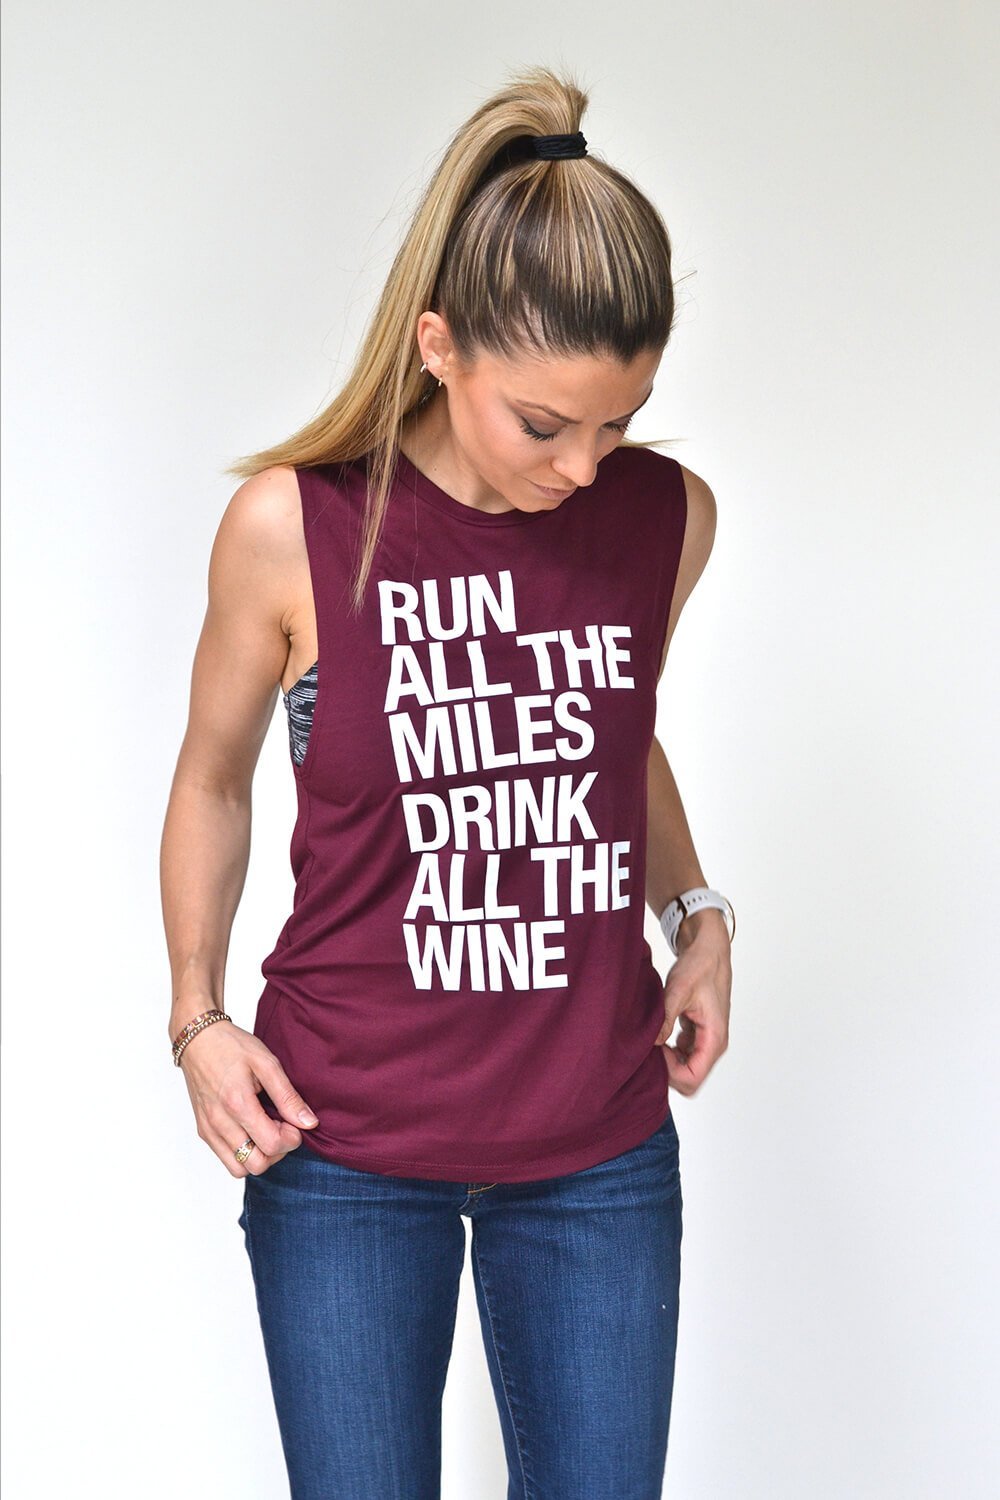 Run all the miles drink all the wine - Funny Running and Drinking Gifts  Framed Mini Art Print by shirtbubble